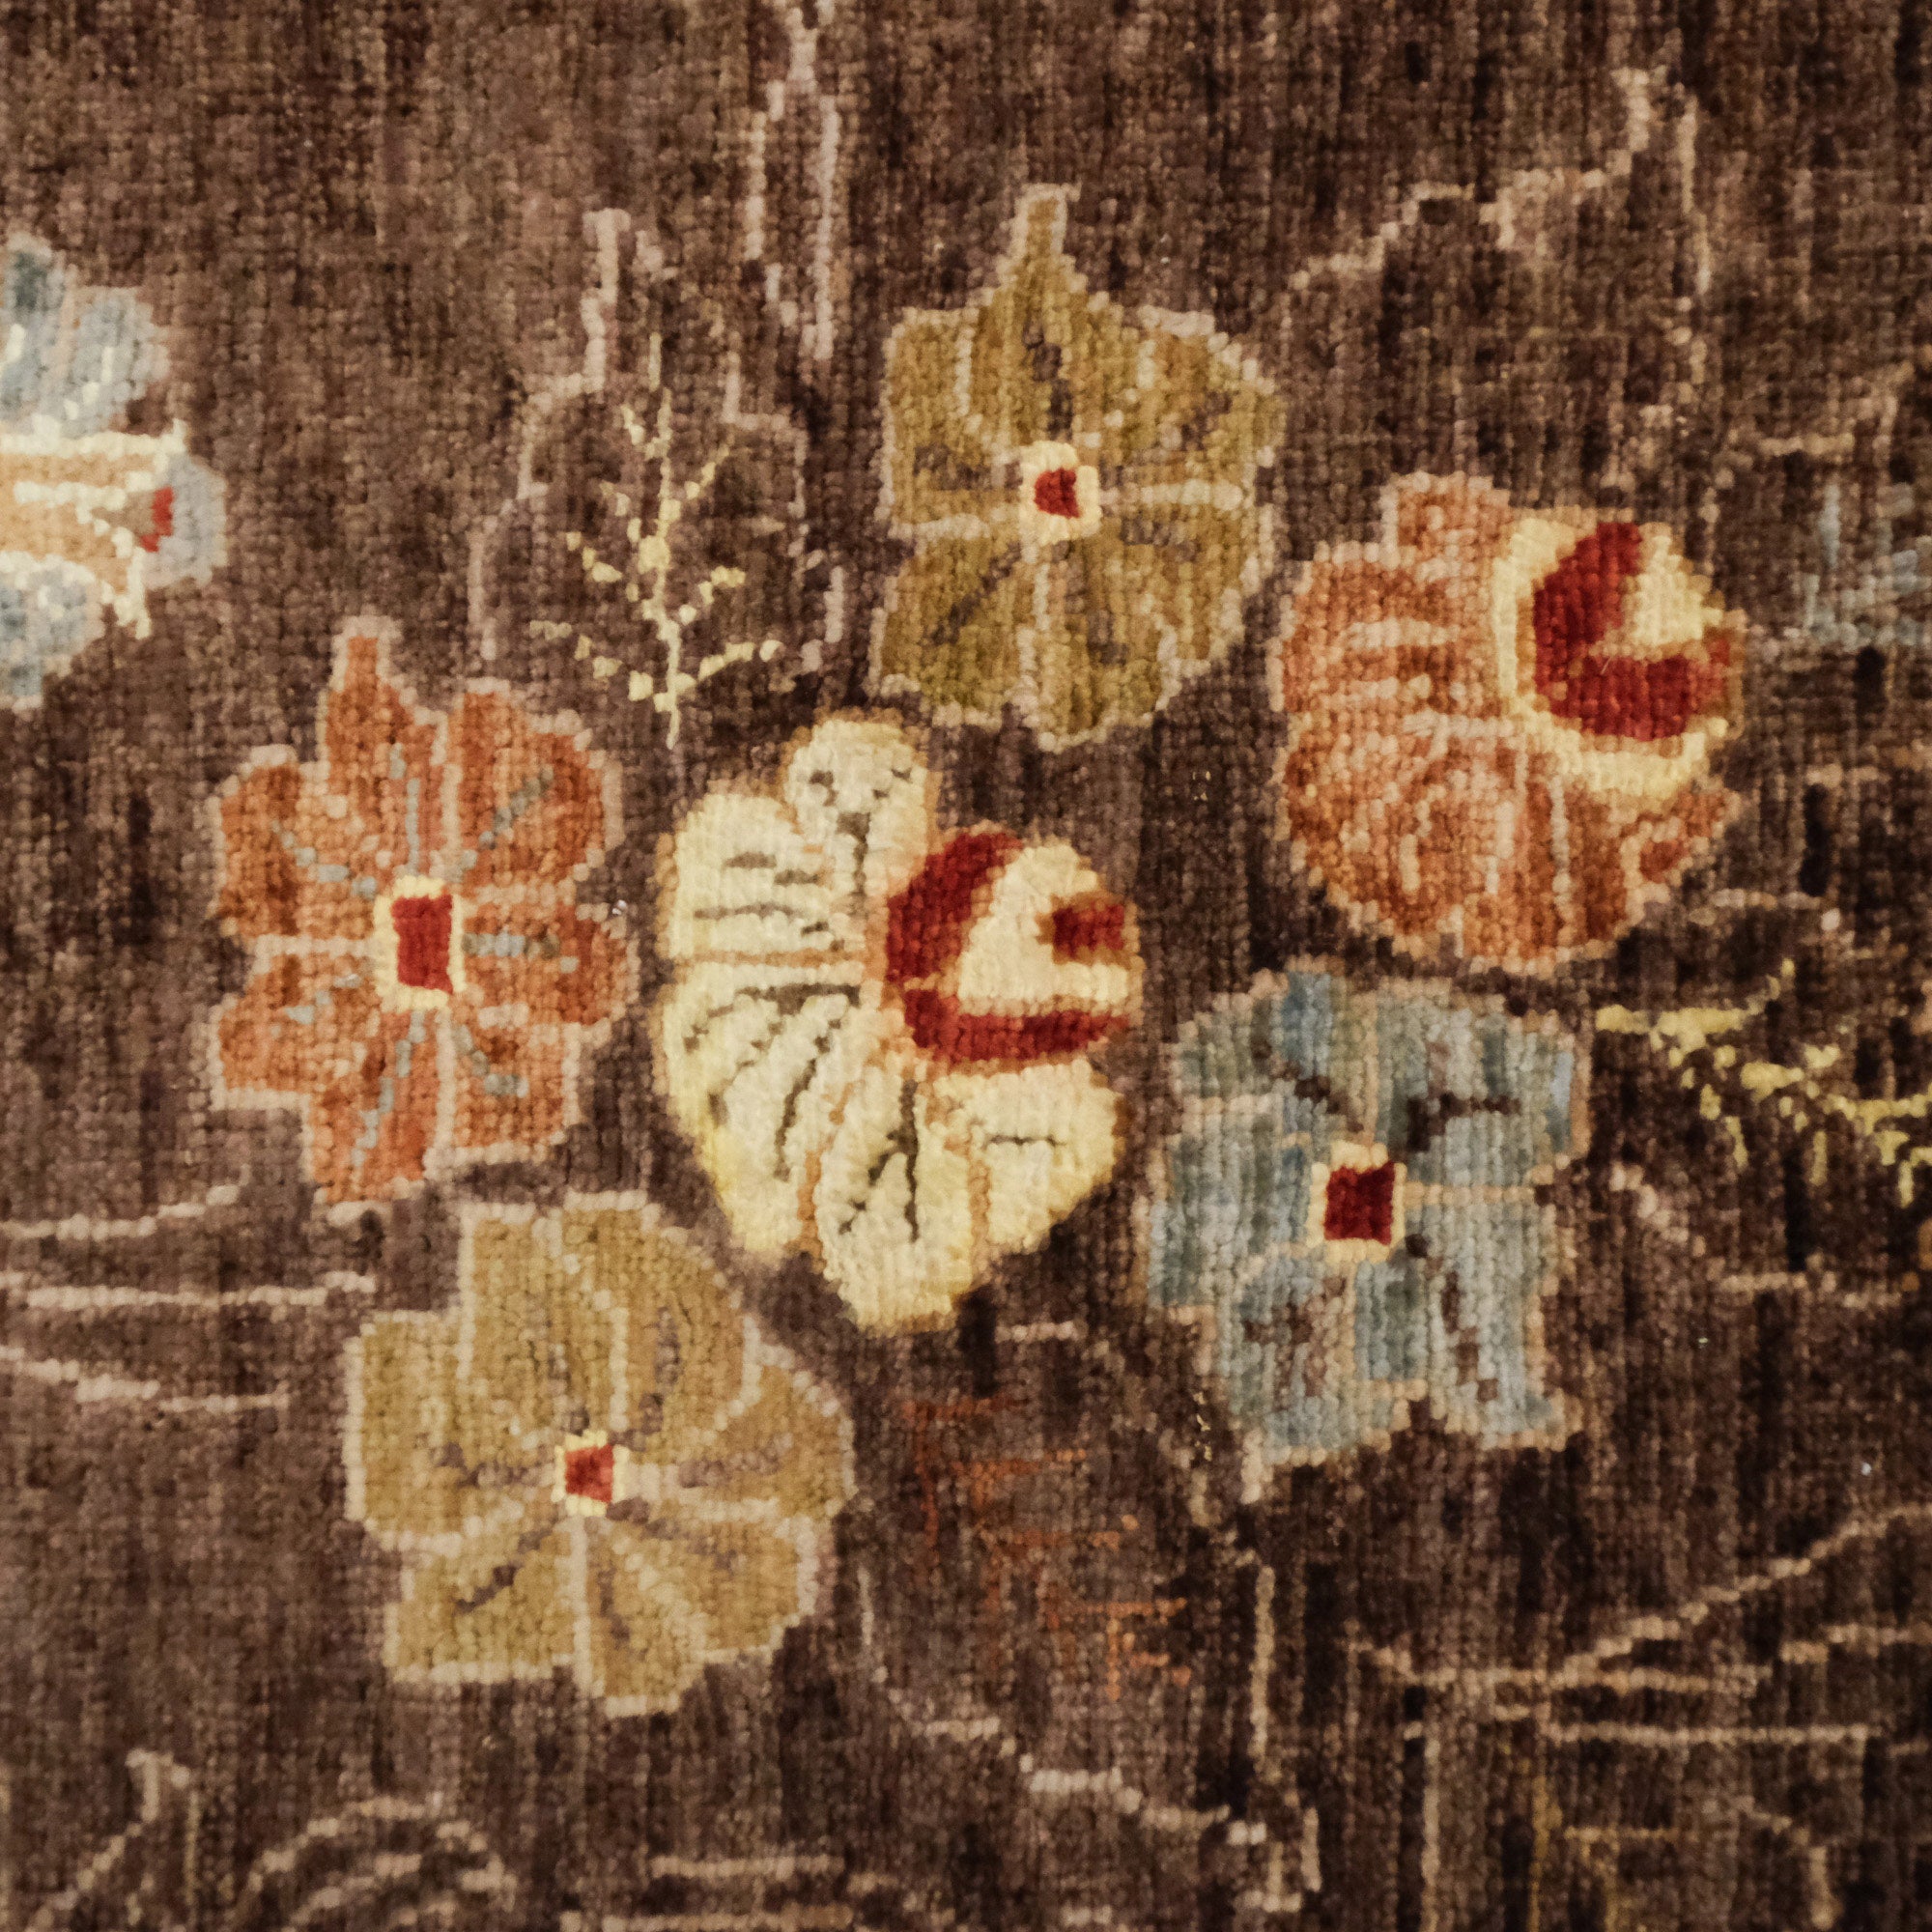 Hand-Woven Flower Patterned Brown Wool Carpet